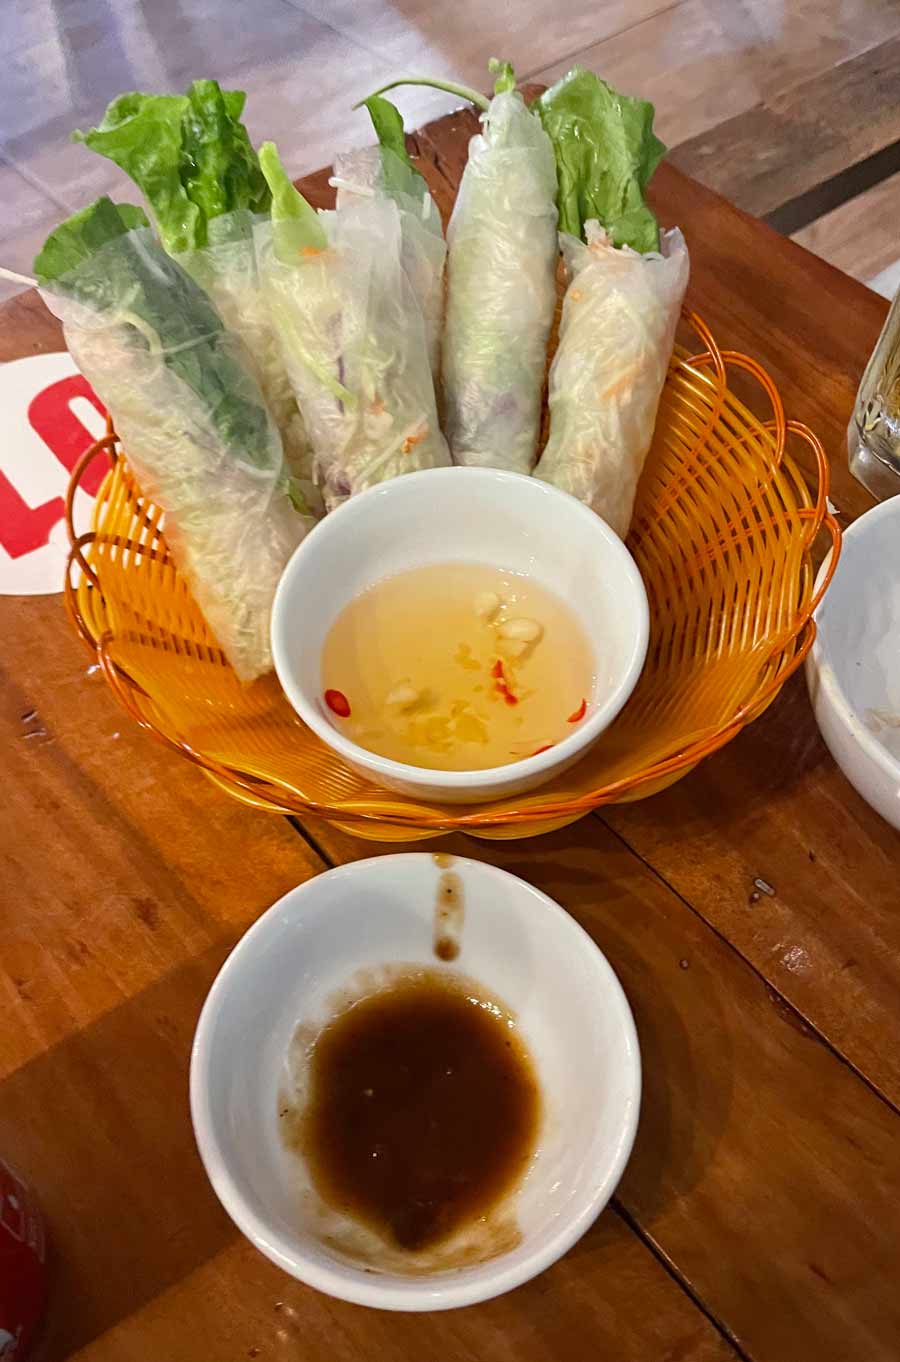 Vietnamese Spring Rolls: Refreshing and crunchy, these spring rolls are a perfect snack. From vegetarian options like pickled carrots, bean sprouts, cucumber and noodles, to non-vegetarian options like meat and shrimp, these soft rice-paper wrapped rolls taste best when dipped into the sauce — a mix of fish and soya sauce. The flavours are clean, fresh and the tangy-salty umami sauce makes it impossible to stop after you’ve tasted one. 